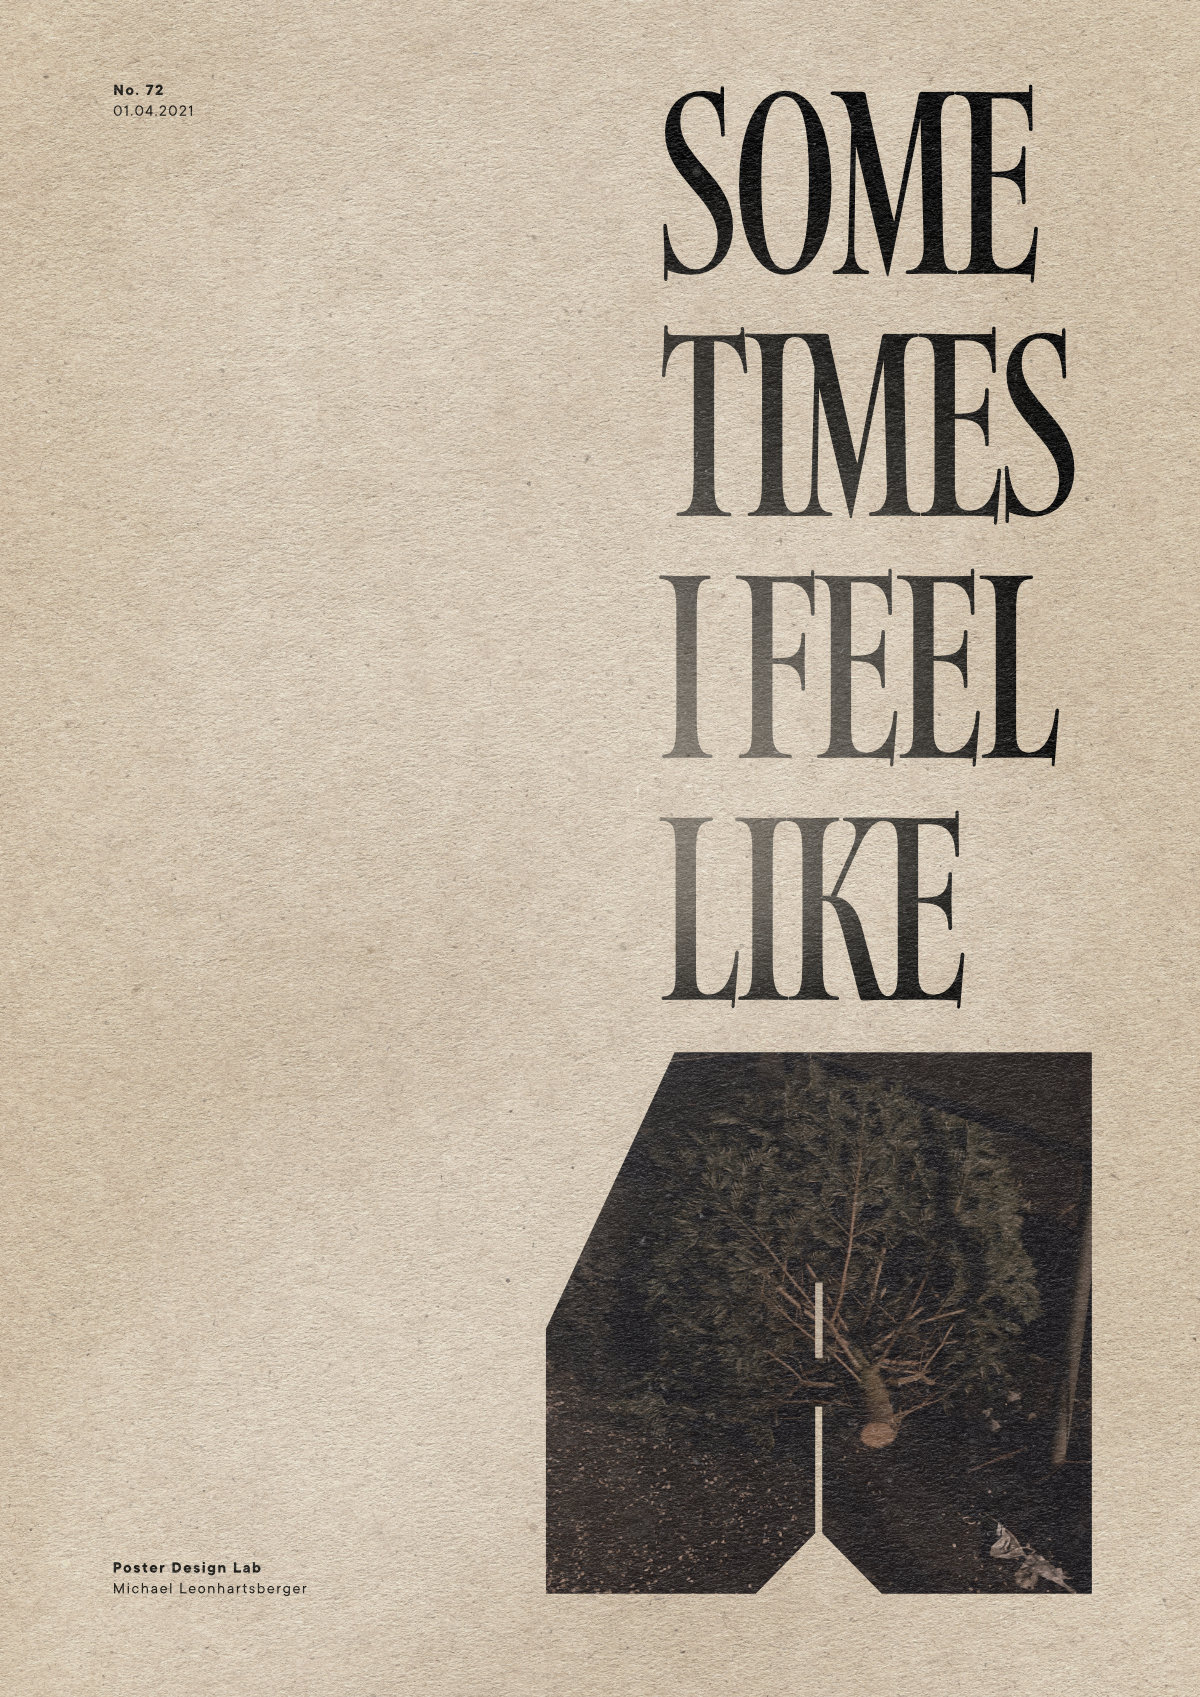 Sometimes I feel like a christmas tree – after Christmas. Poster by Michael Leonhartsberger